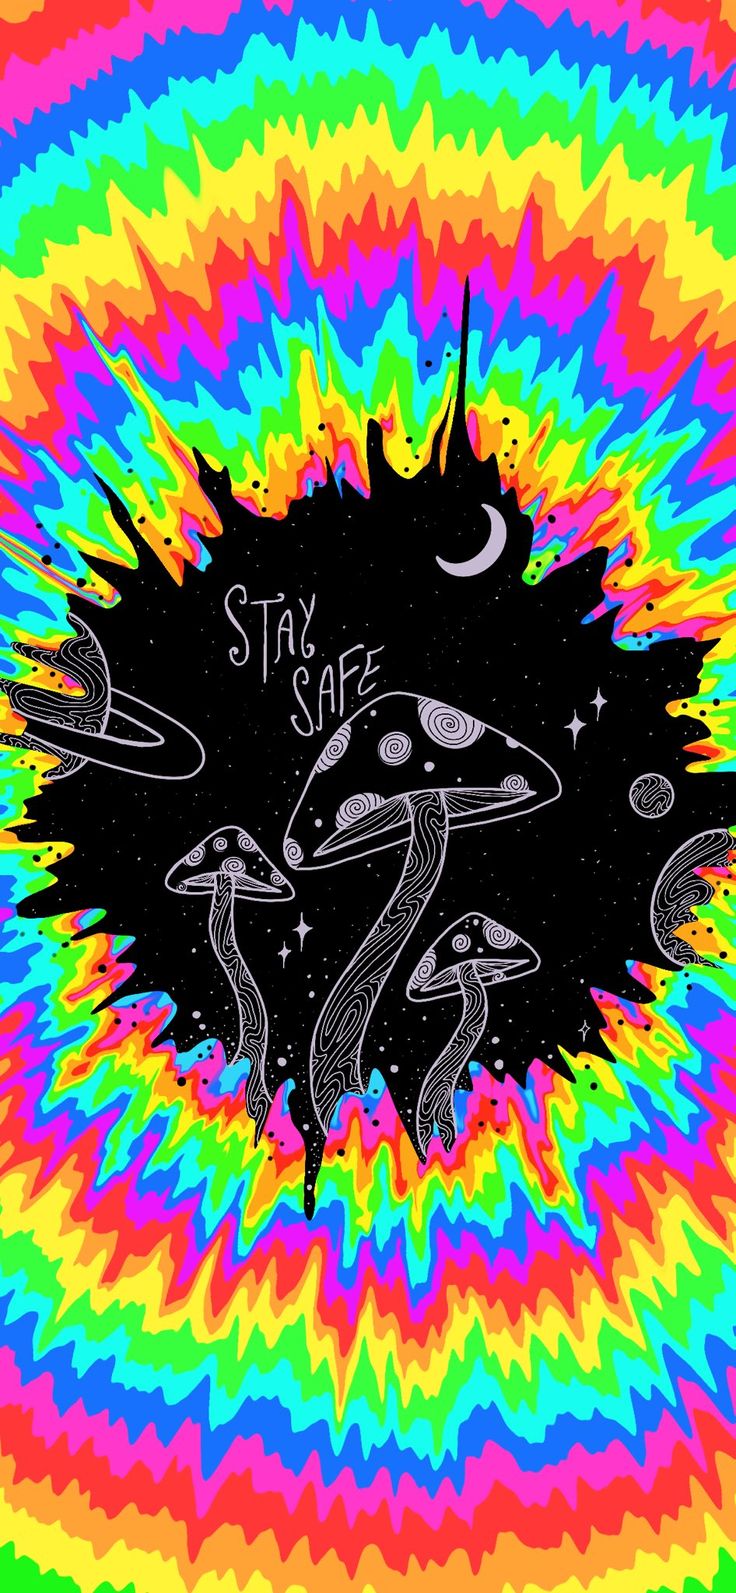 Free download Savannah Saturn on Trippy iphone wallpaper Hippie [736x1593]  for your Desktop, Mobile & Tablet | Explore 25+ Trippy Cartoon iPhone  Wallpapers | Wallpaper Trippy, Trippy Backgrounds, Trippy Wallpapers